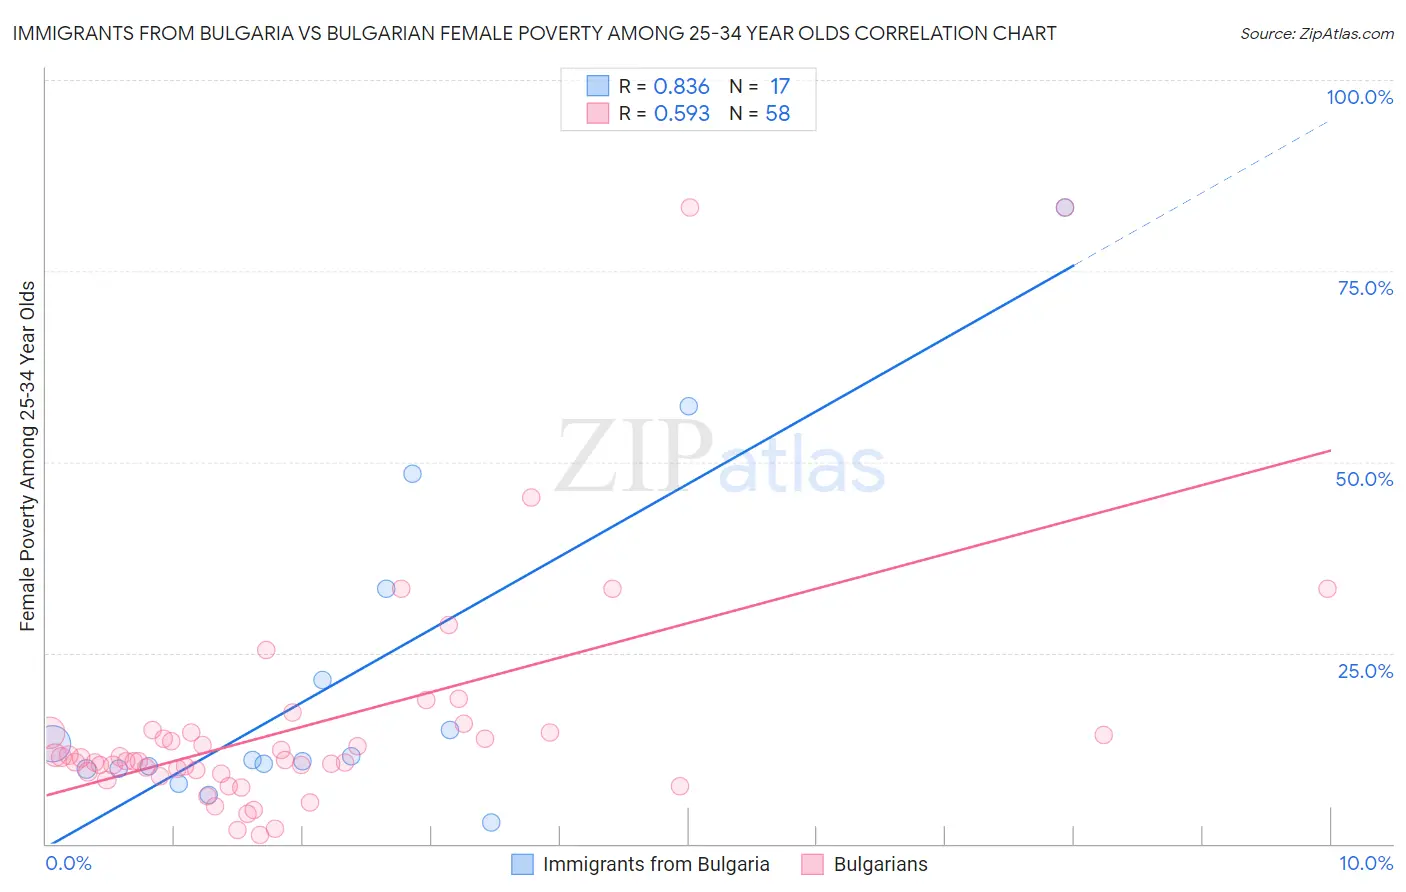 Immigrants from Bulgaria vs Bulgarian Female Poverty Among 25-34 Year Olds